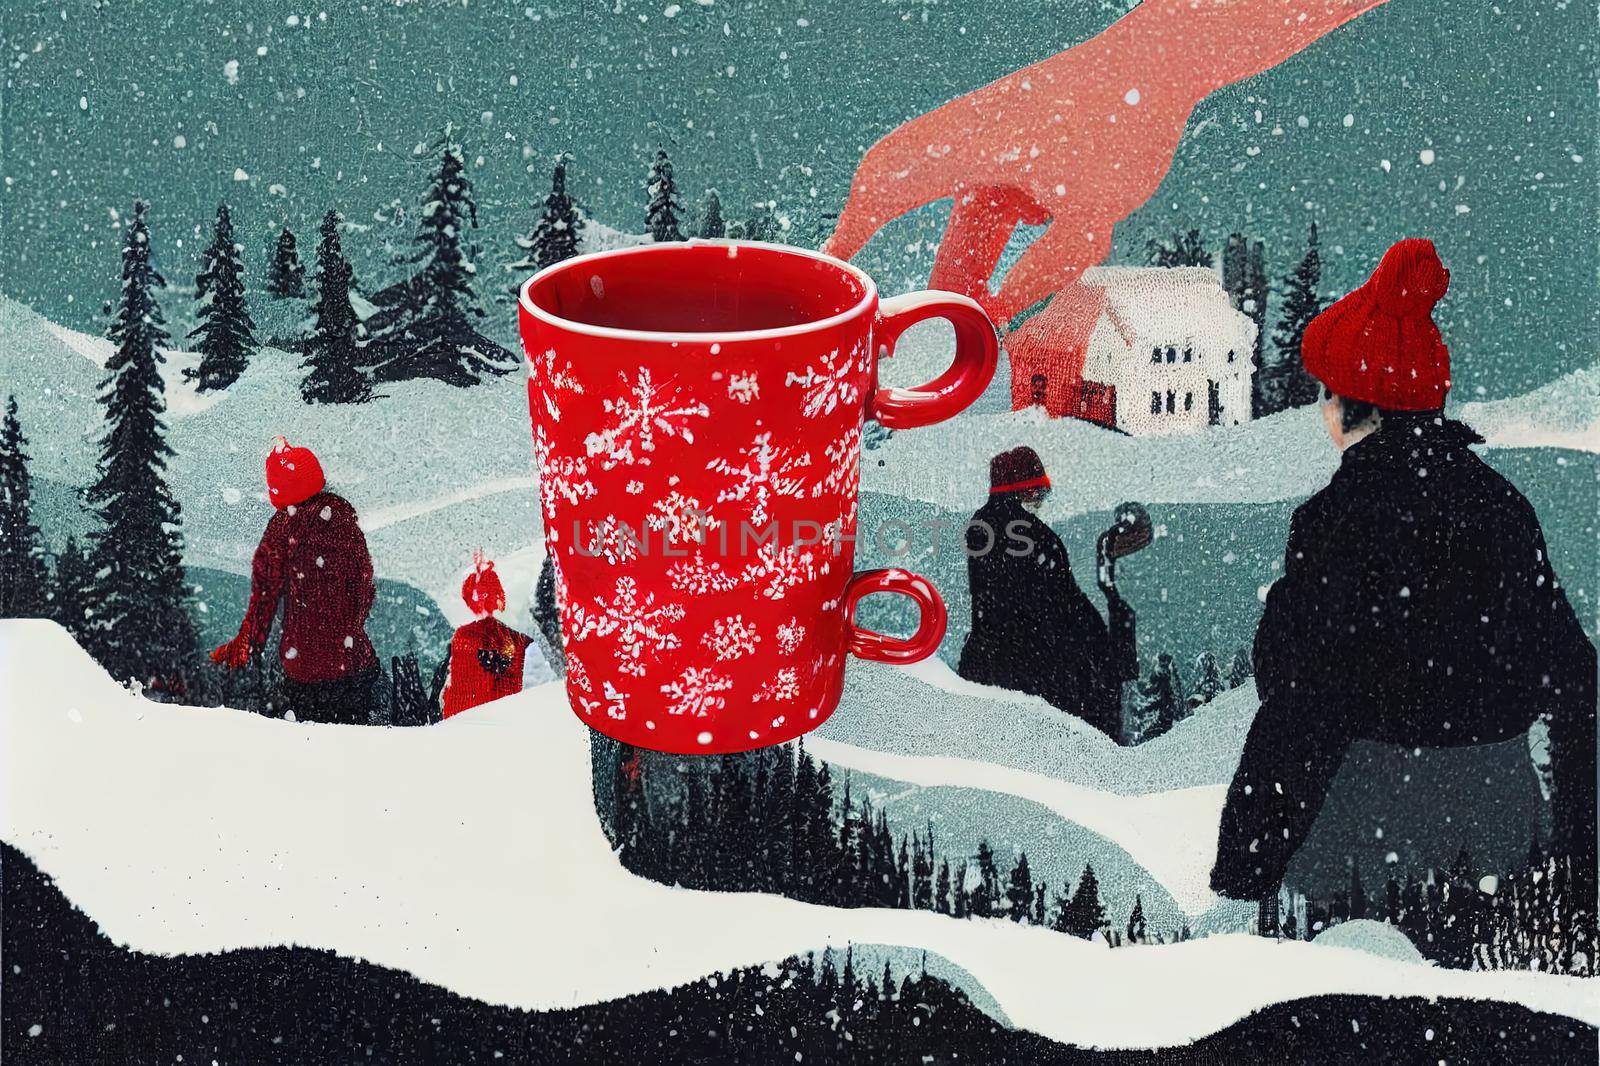 a red mug in the hands of those dressed in knitted mittens against the backdrop of a blurred snow landscape. a warming drink for a winter morning. High quality illustration